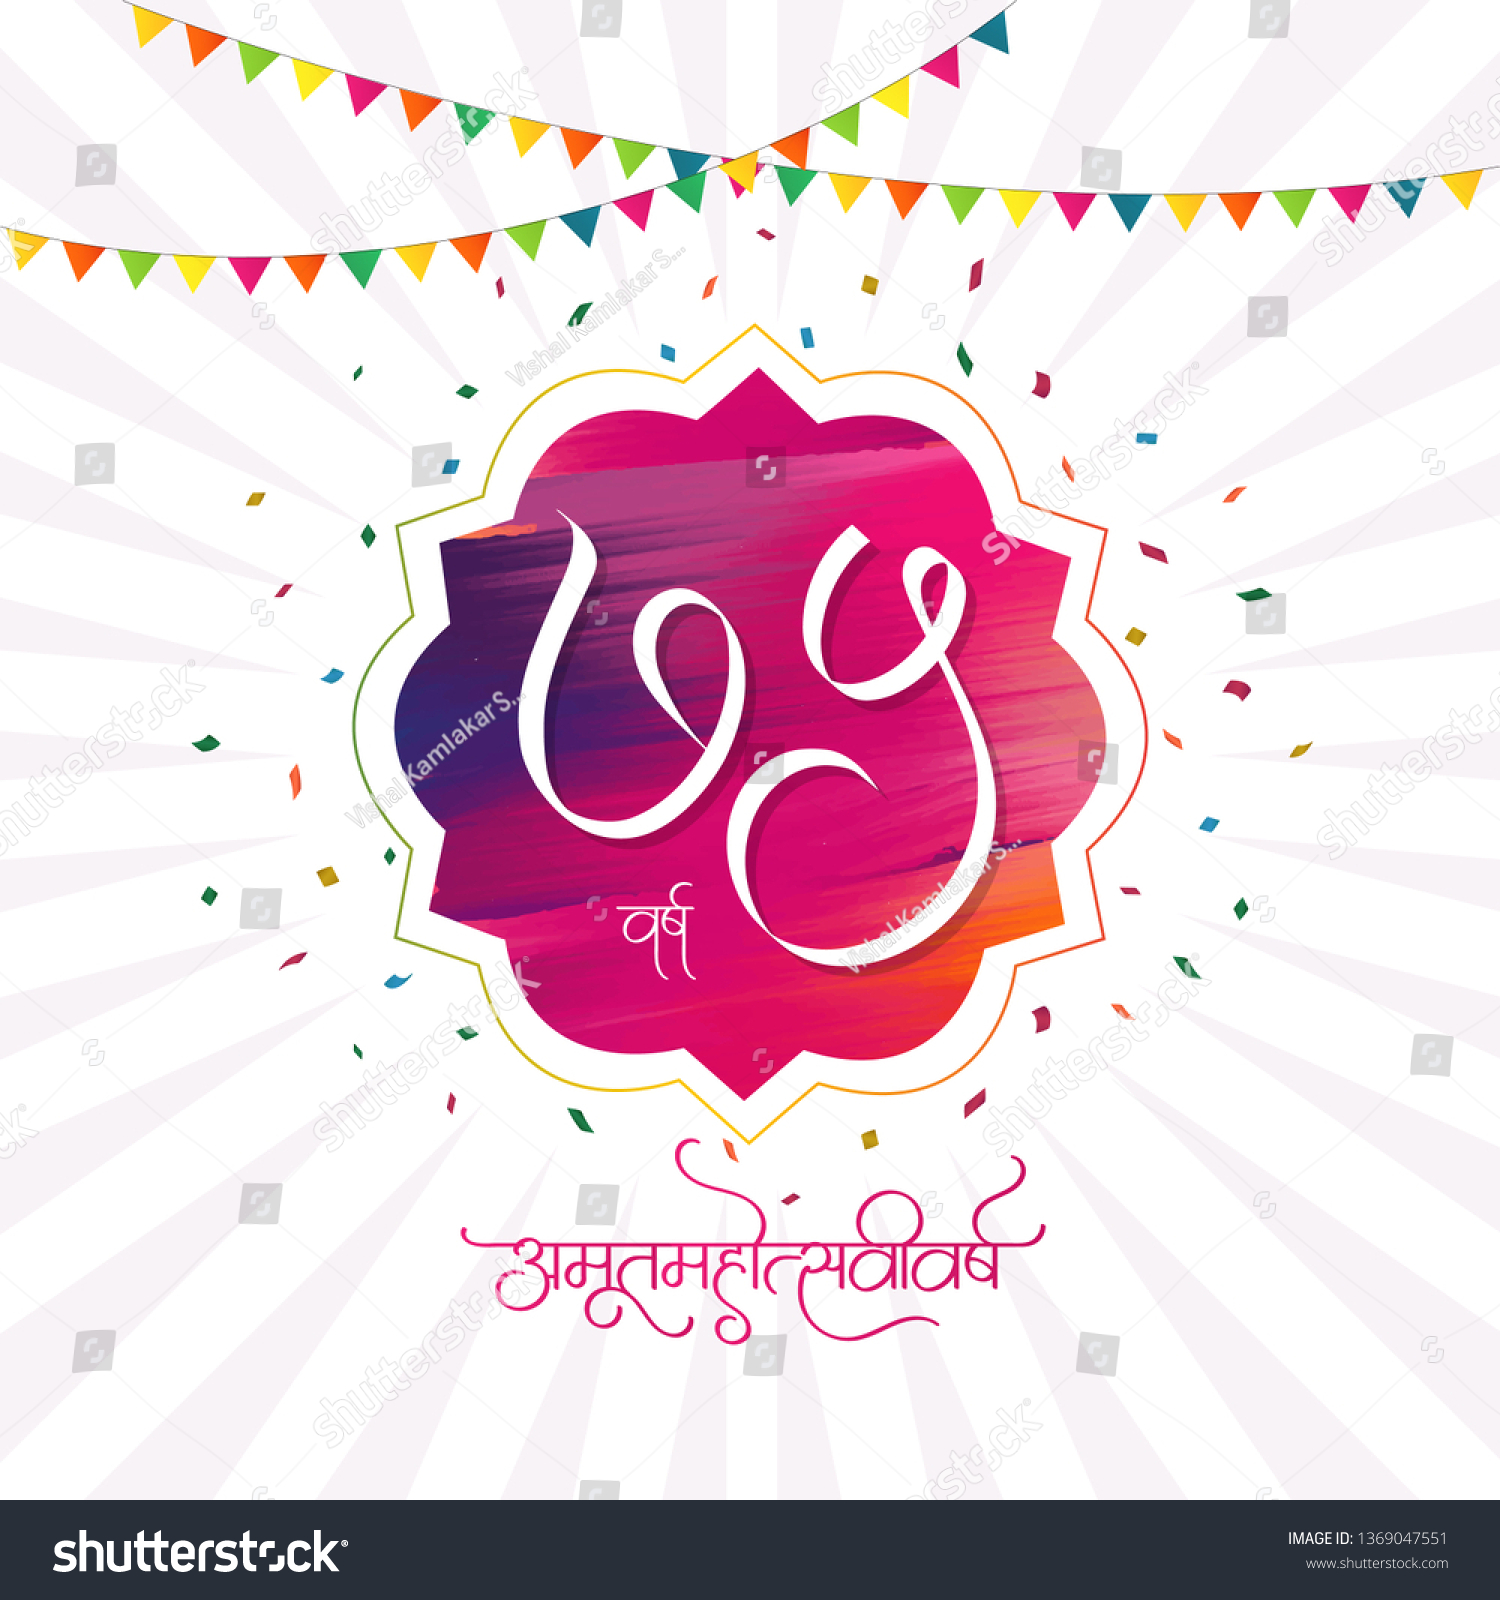 Marathi Calligraphy 75 Year Meaning 75th Royalty Free Stock Image